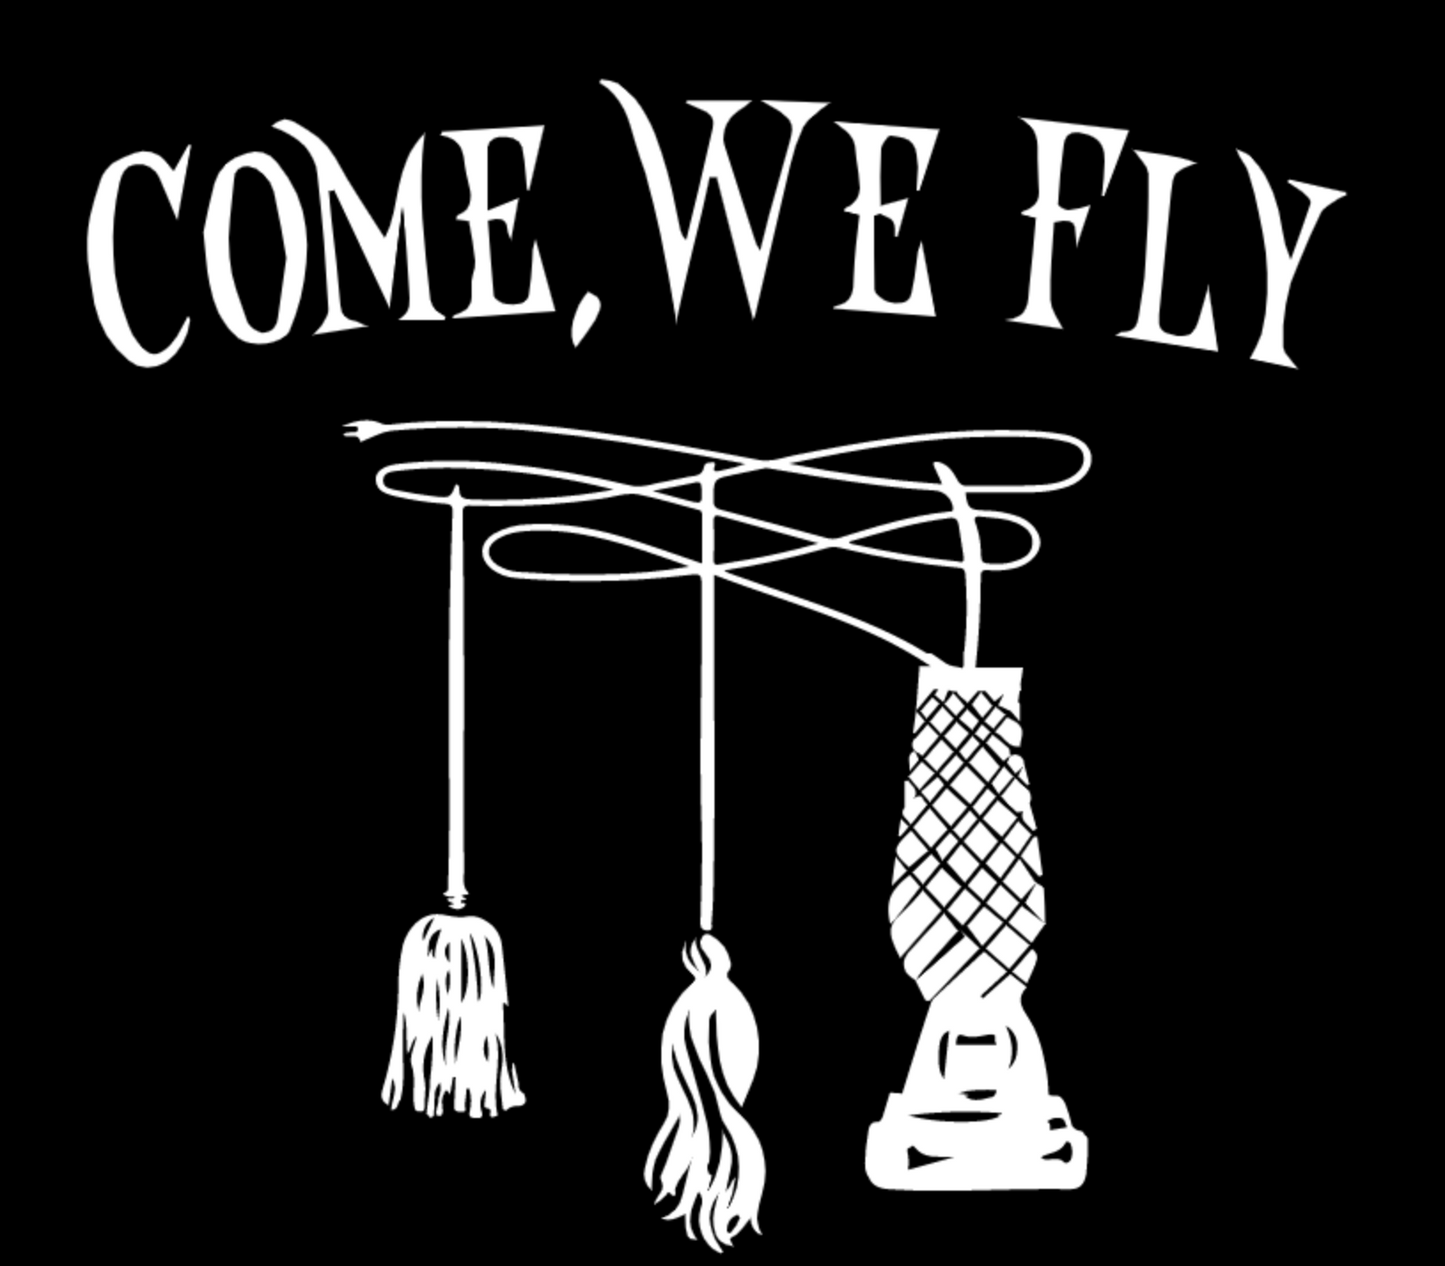 COME, WE FLY